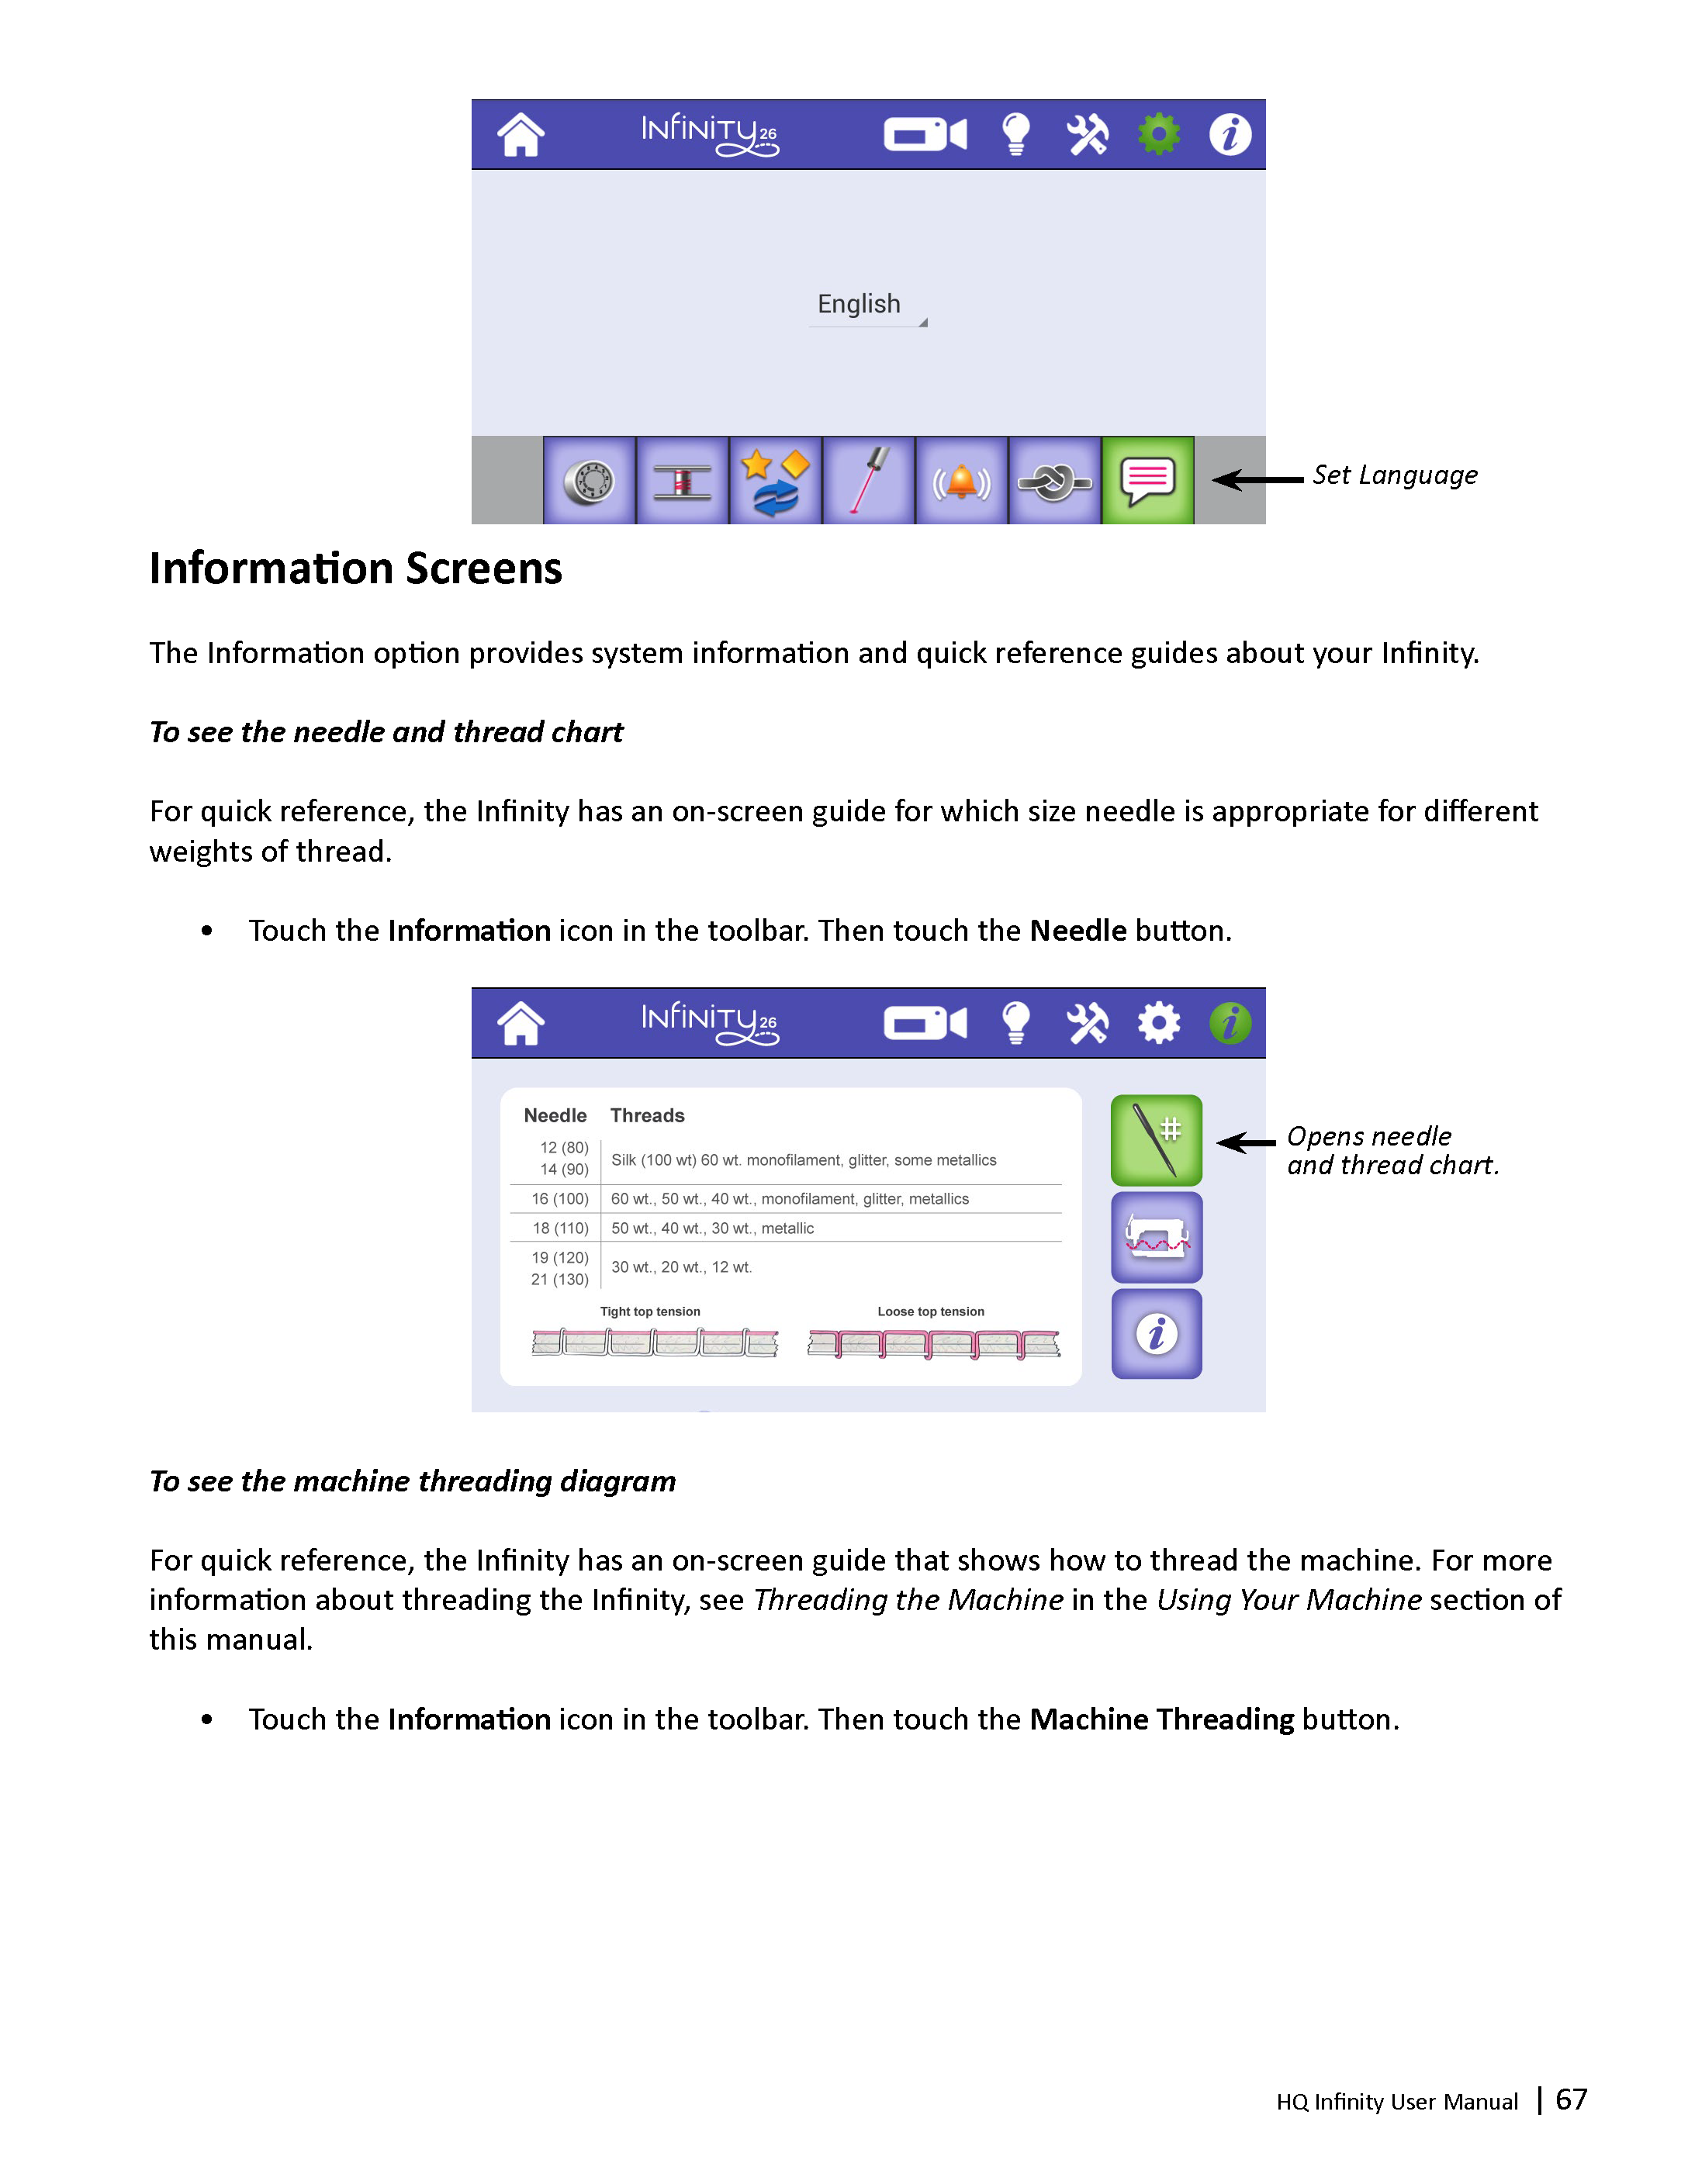 QM33001-HQ-Infinity-User-manual-version-1.4-ALL-Web-1_Page_68.png